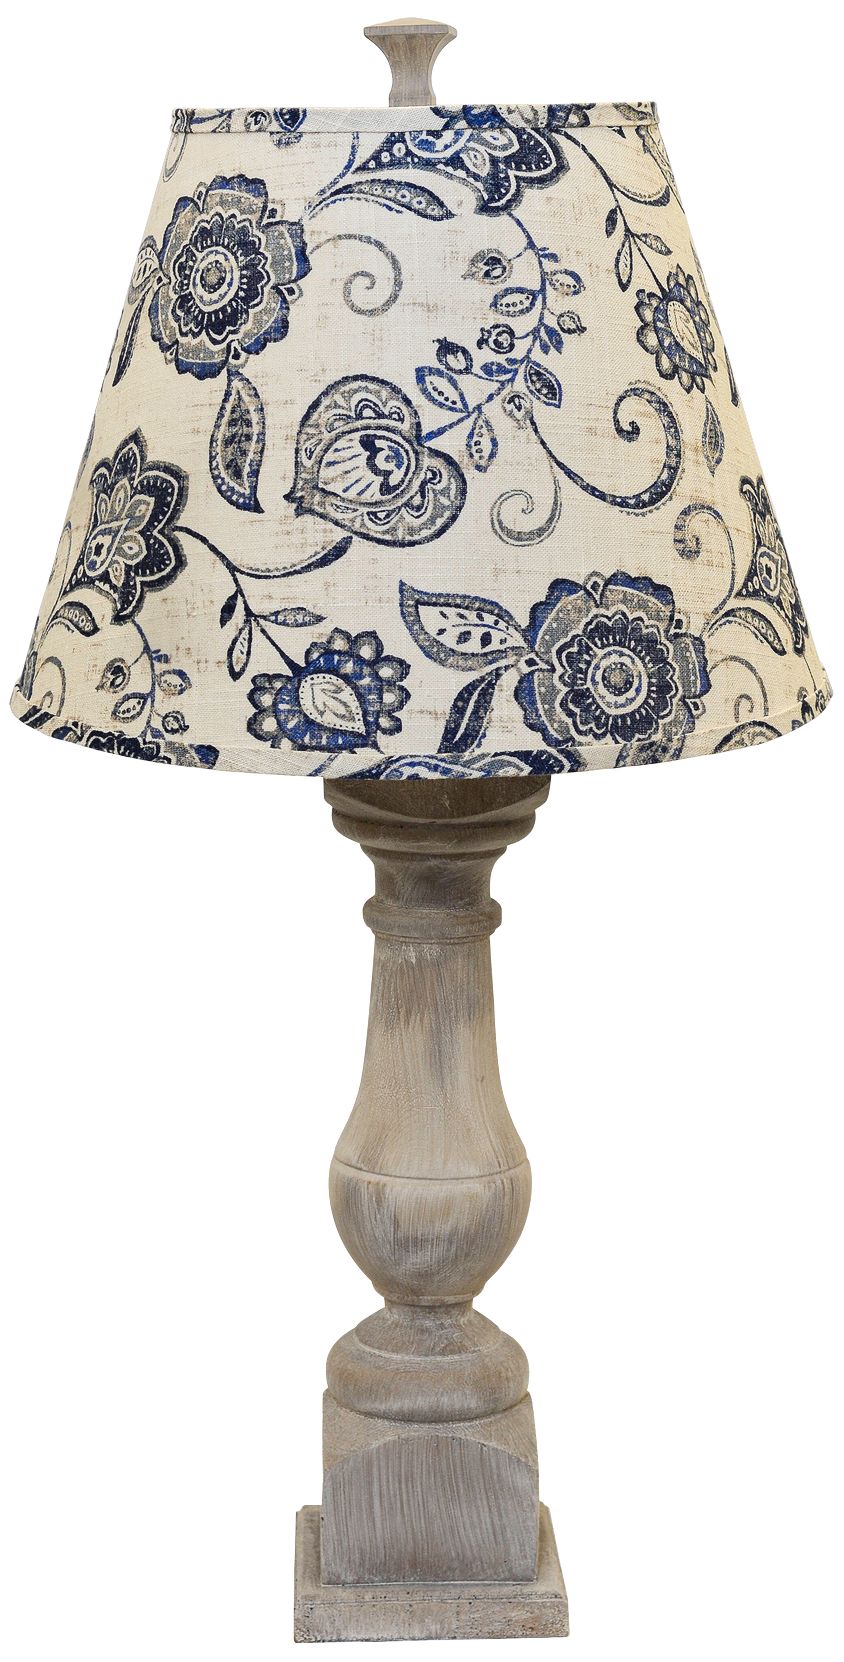 cottage style table lamps